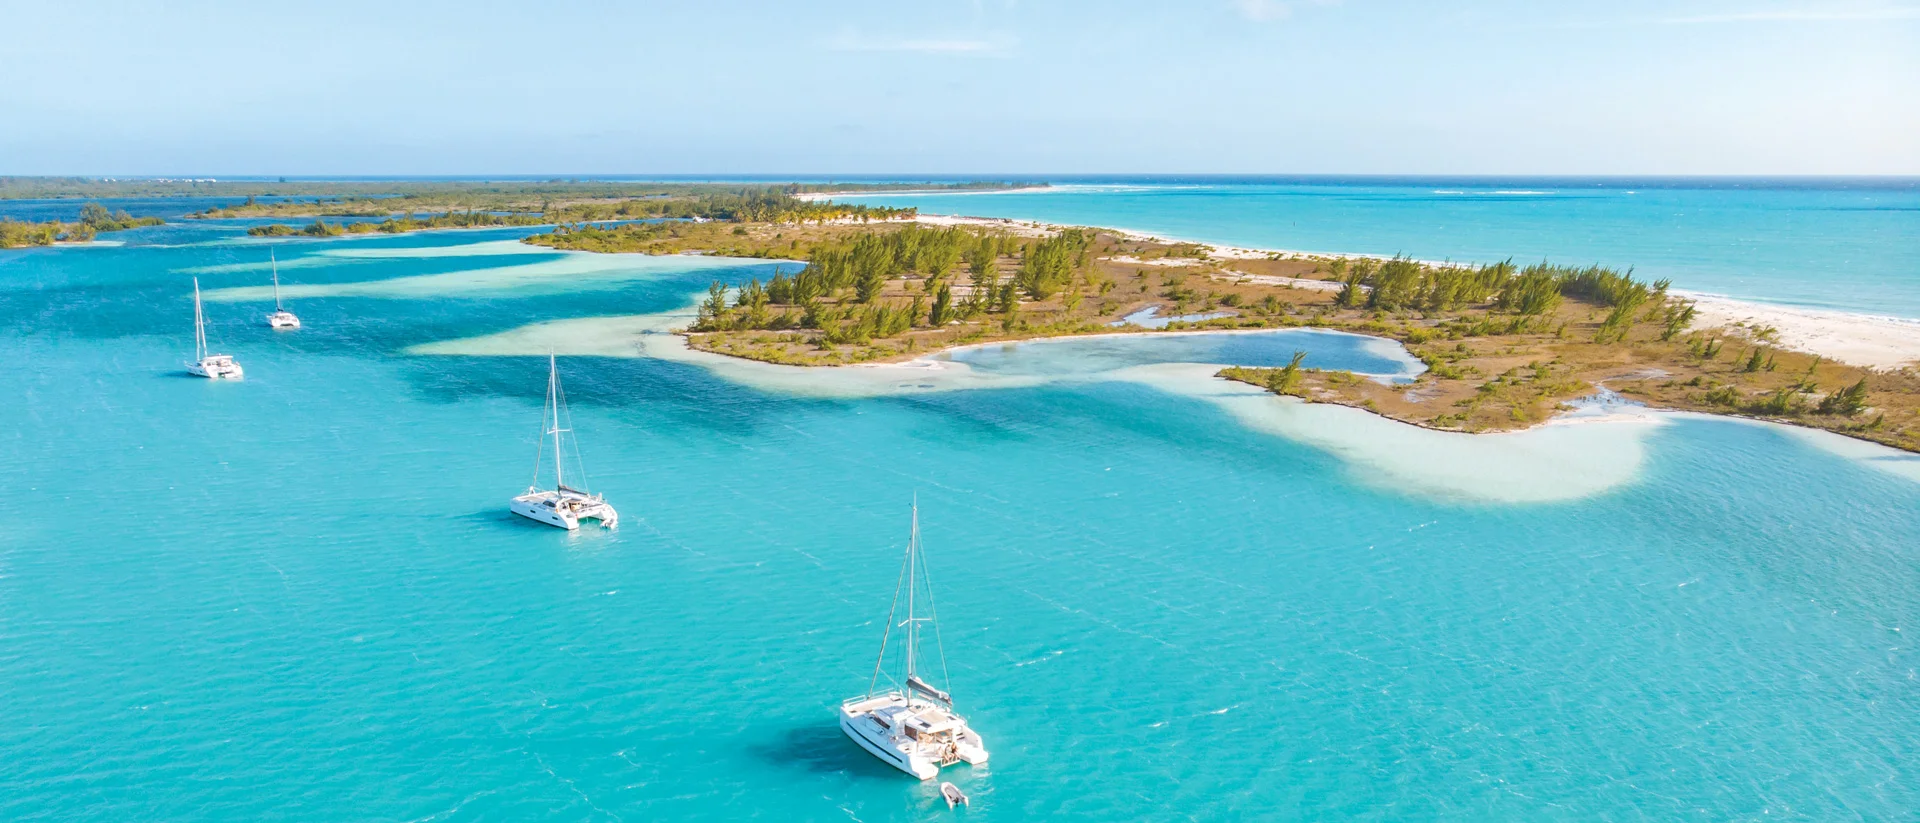 charter anchorage with boats & pristine beaches for sustainable sailing